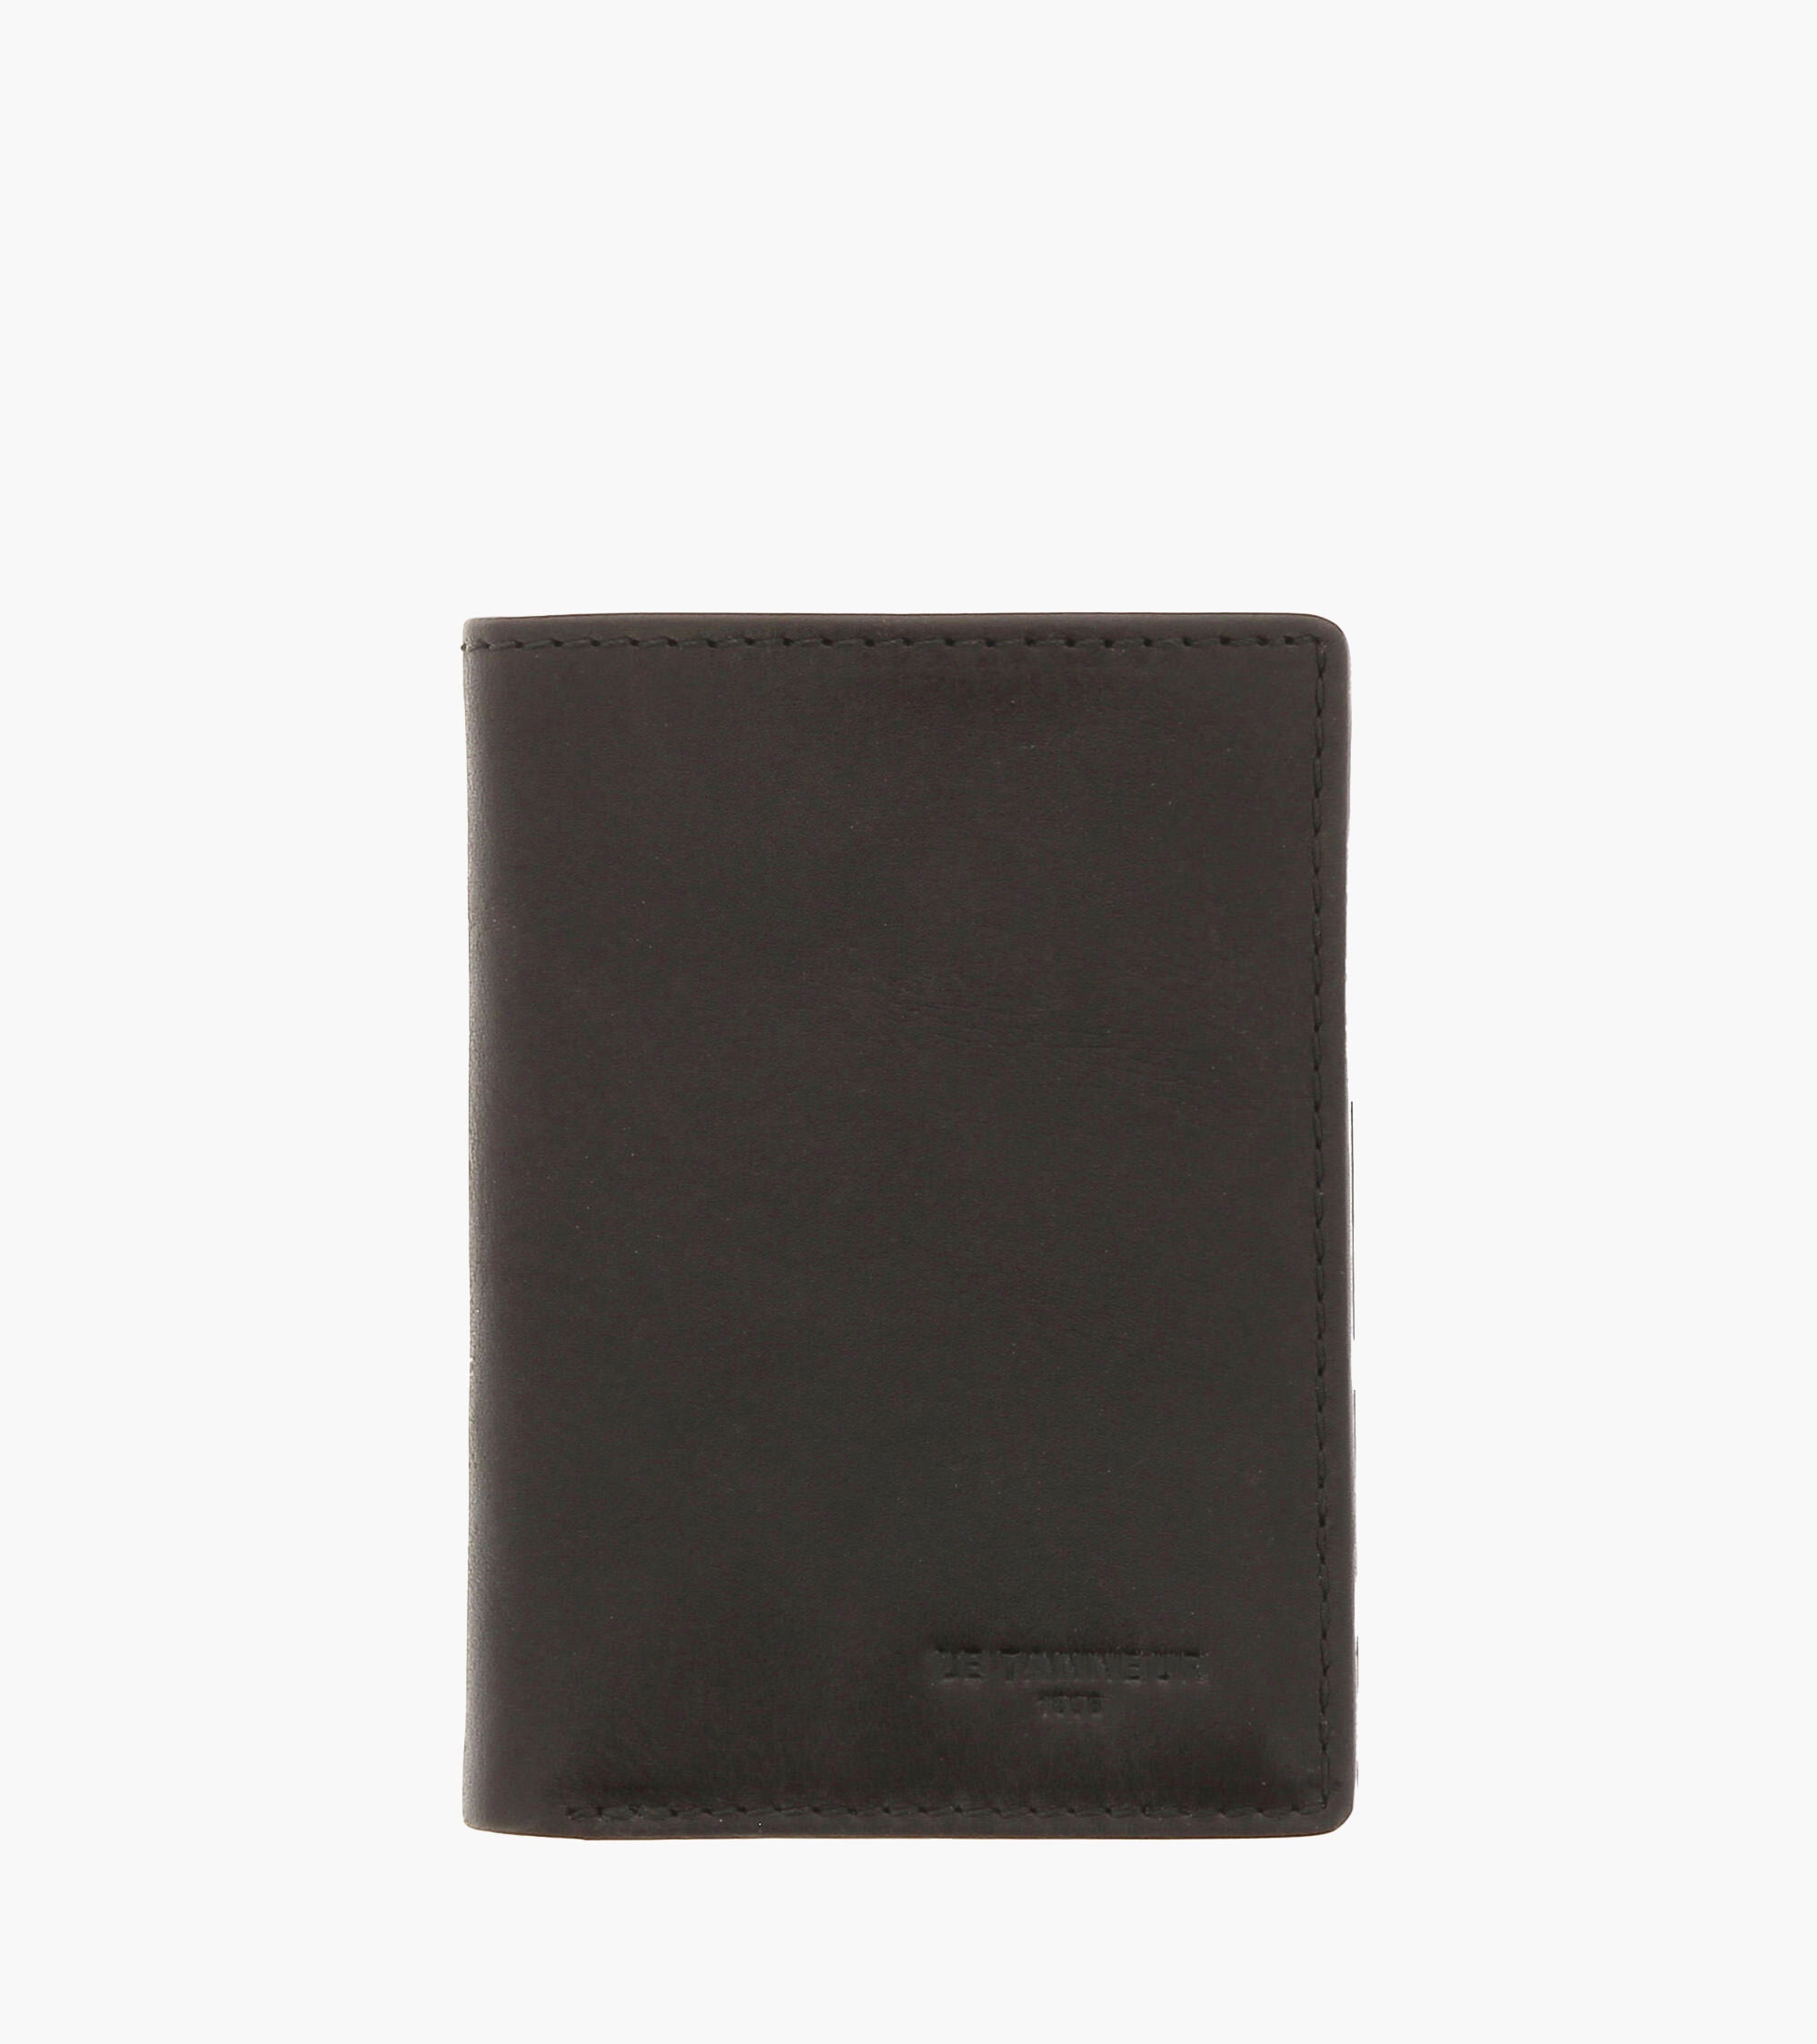 Gary card holder in oiled leather